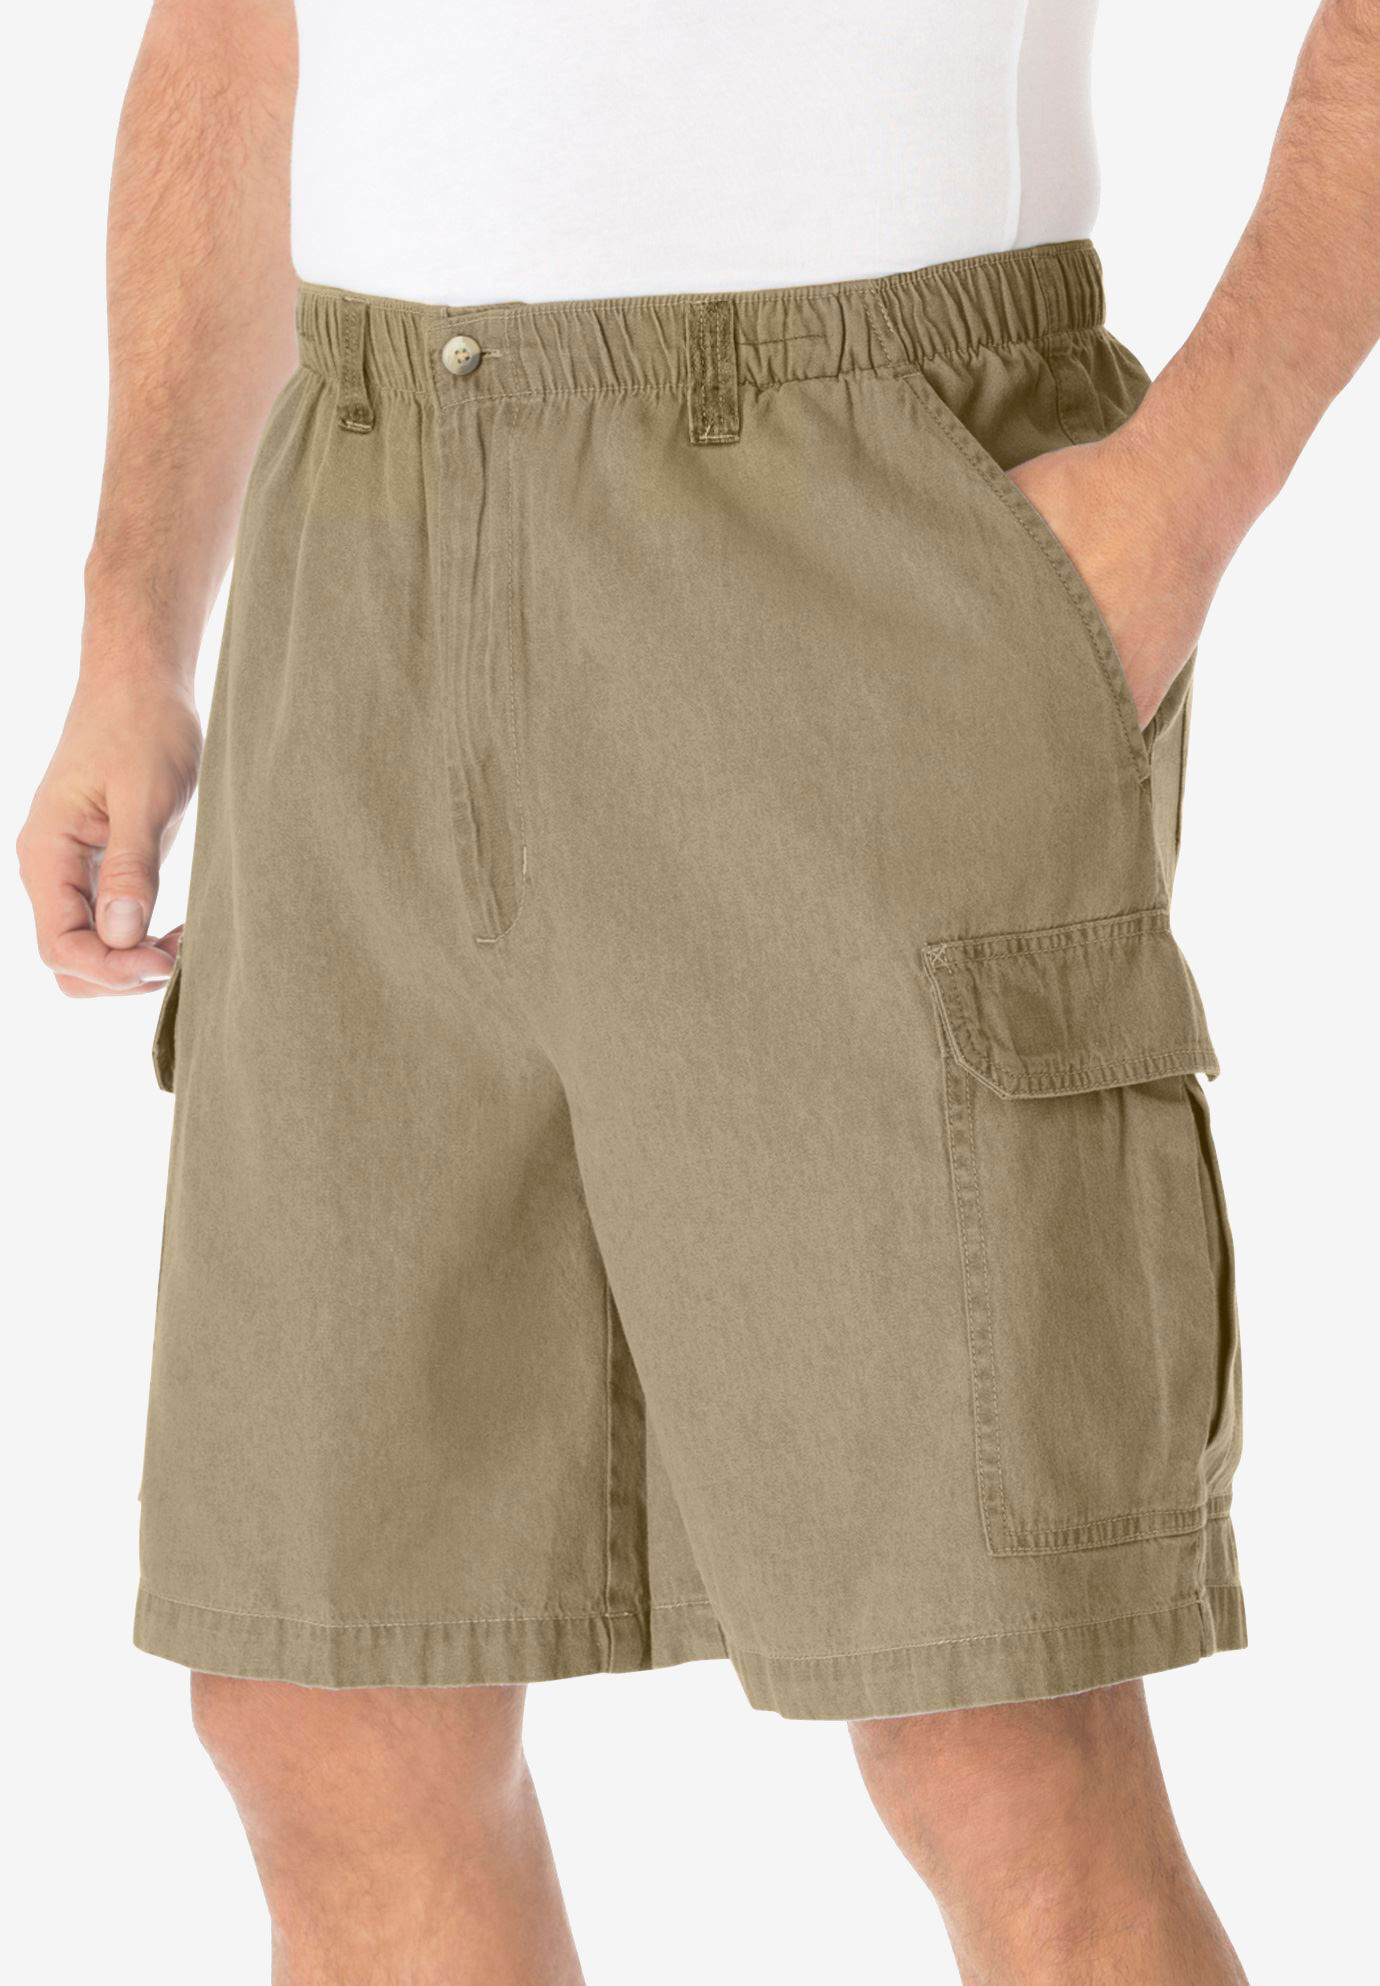 Big Mens Cargo Shorts up to Size 10X